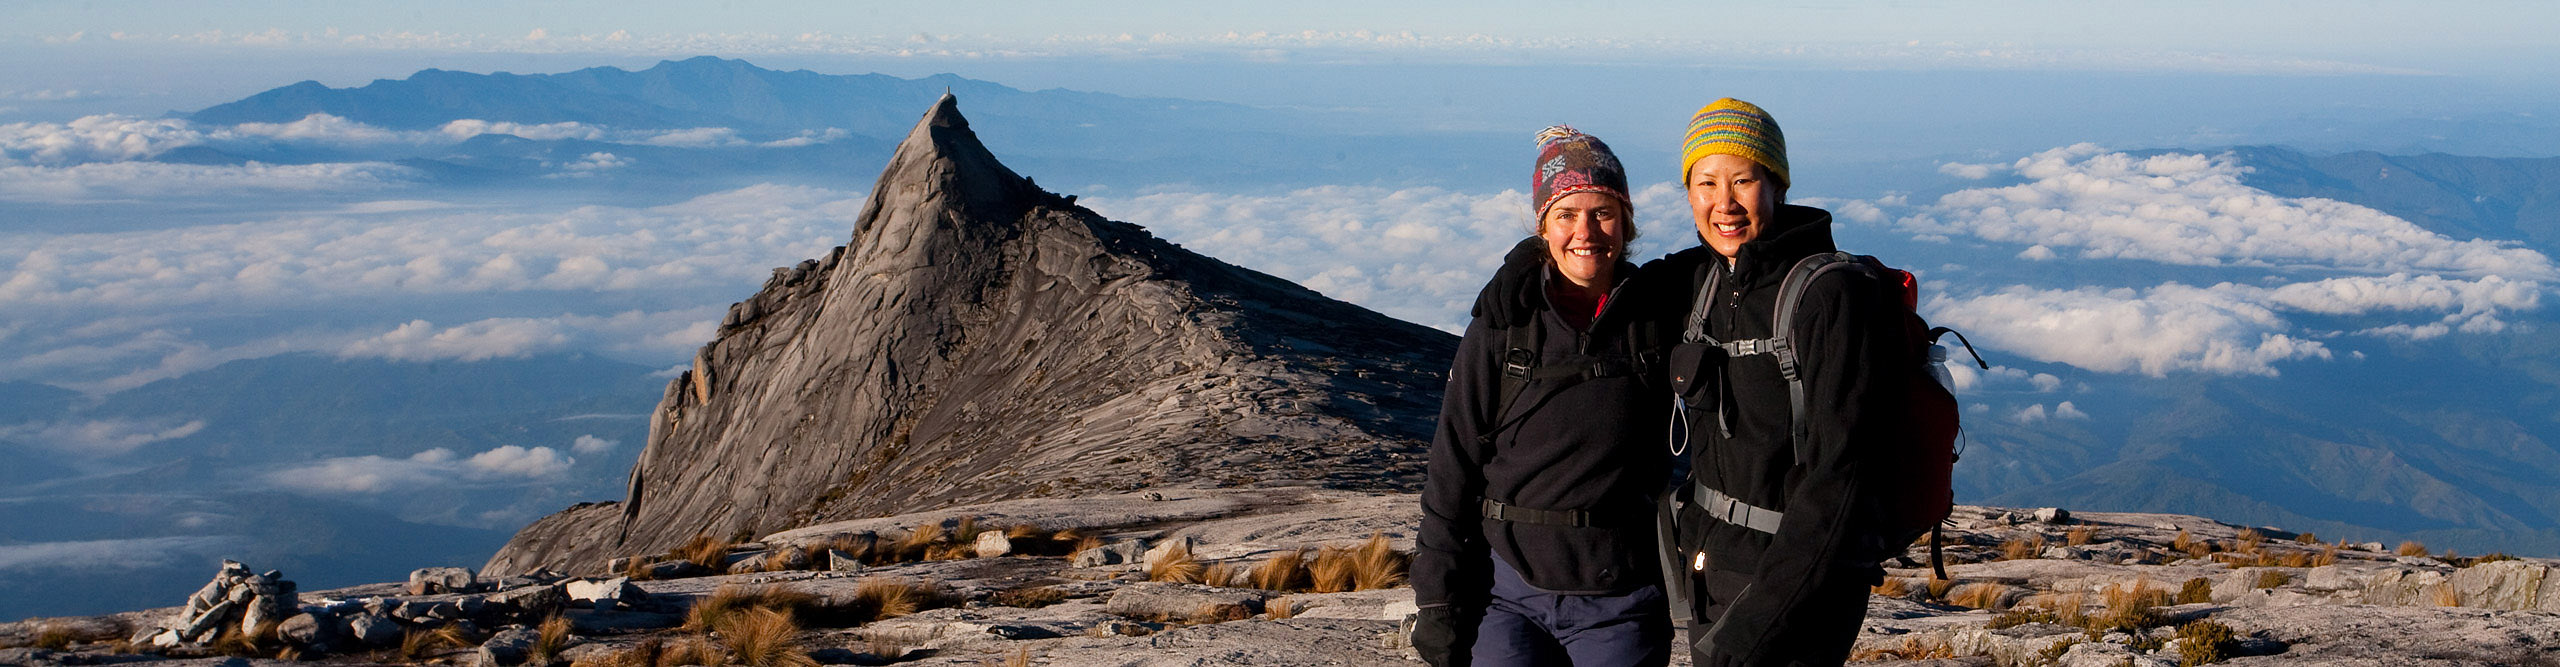 Climbers smiling at the summit of Mount Kinabalu, in Borneo, on a clear sunny day